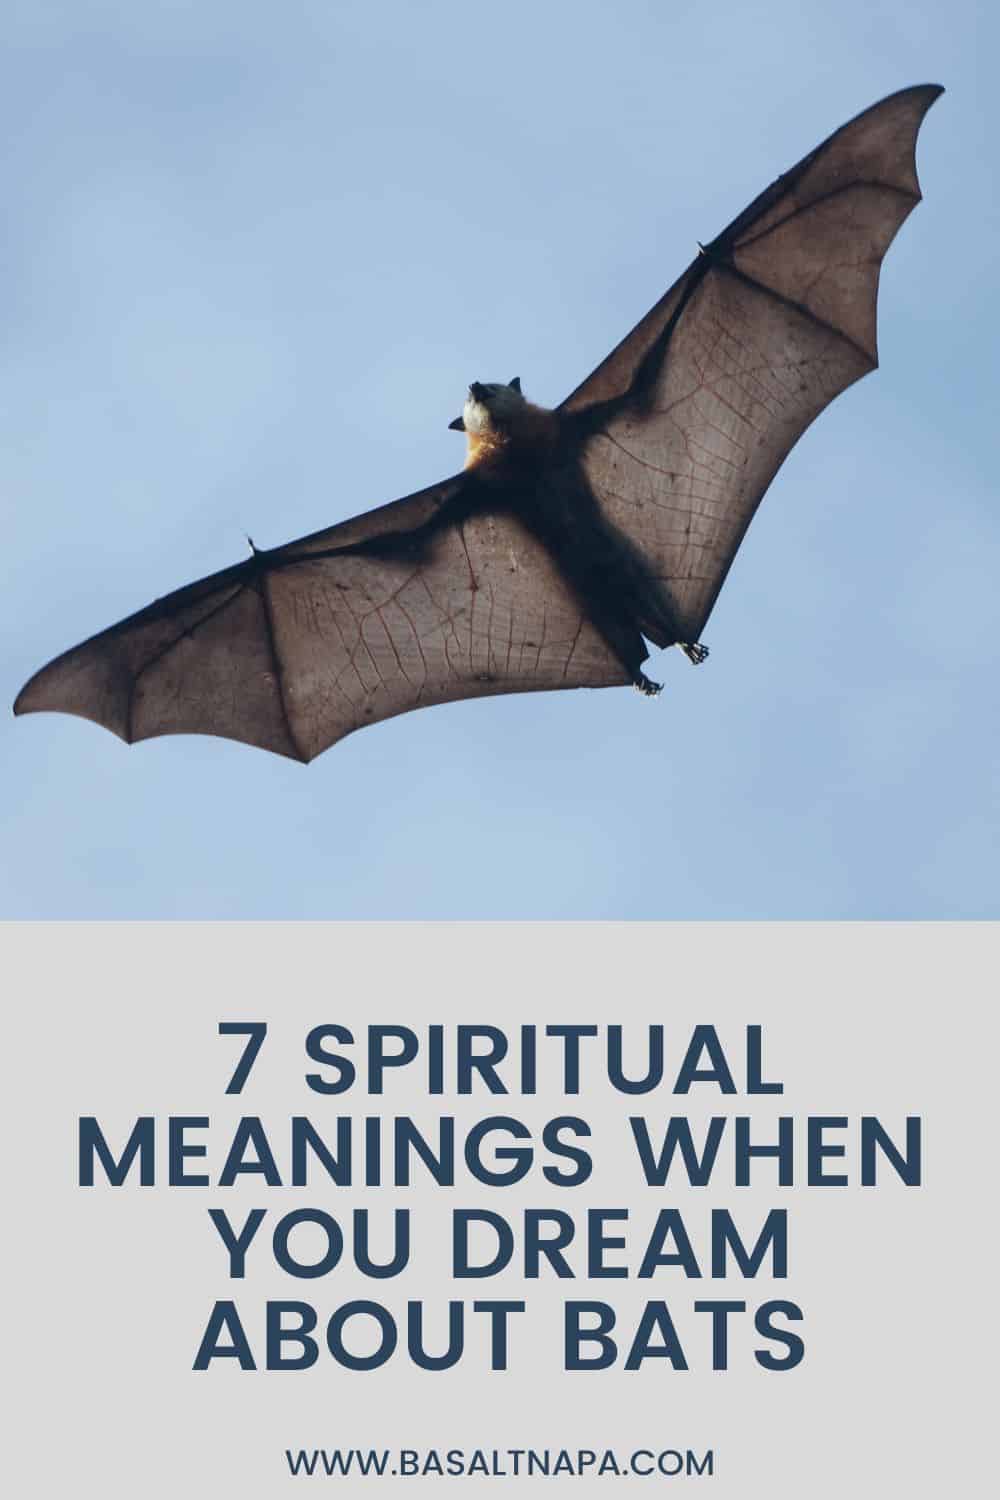 7 Spiritual Meanings When You Dream About Bats